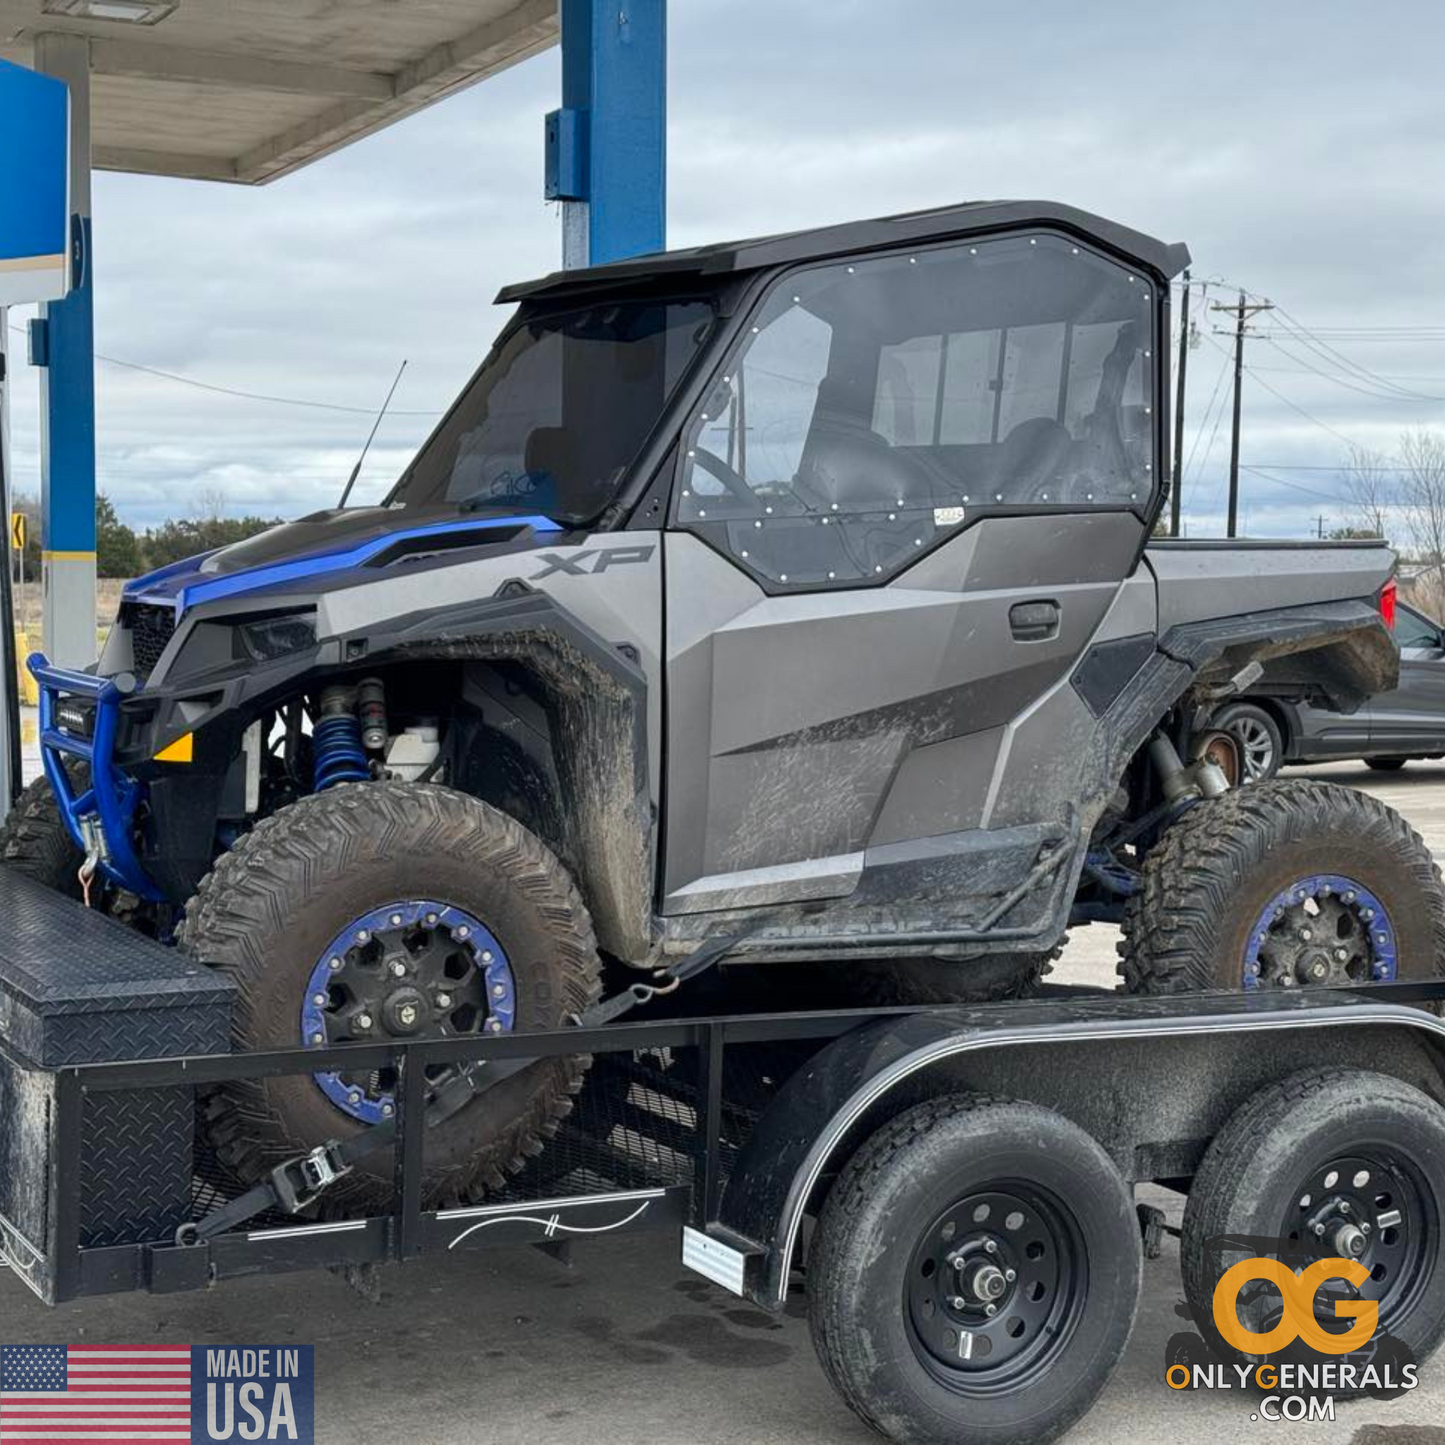 Customer submitted photo open towing a Polaris General showing off their SideskinsLITE hard upper doors from OnlyGenerals